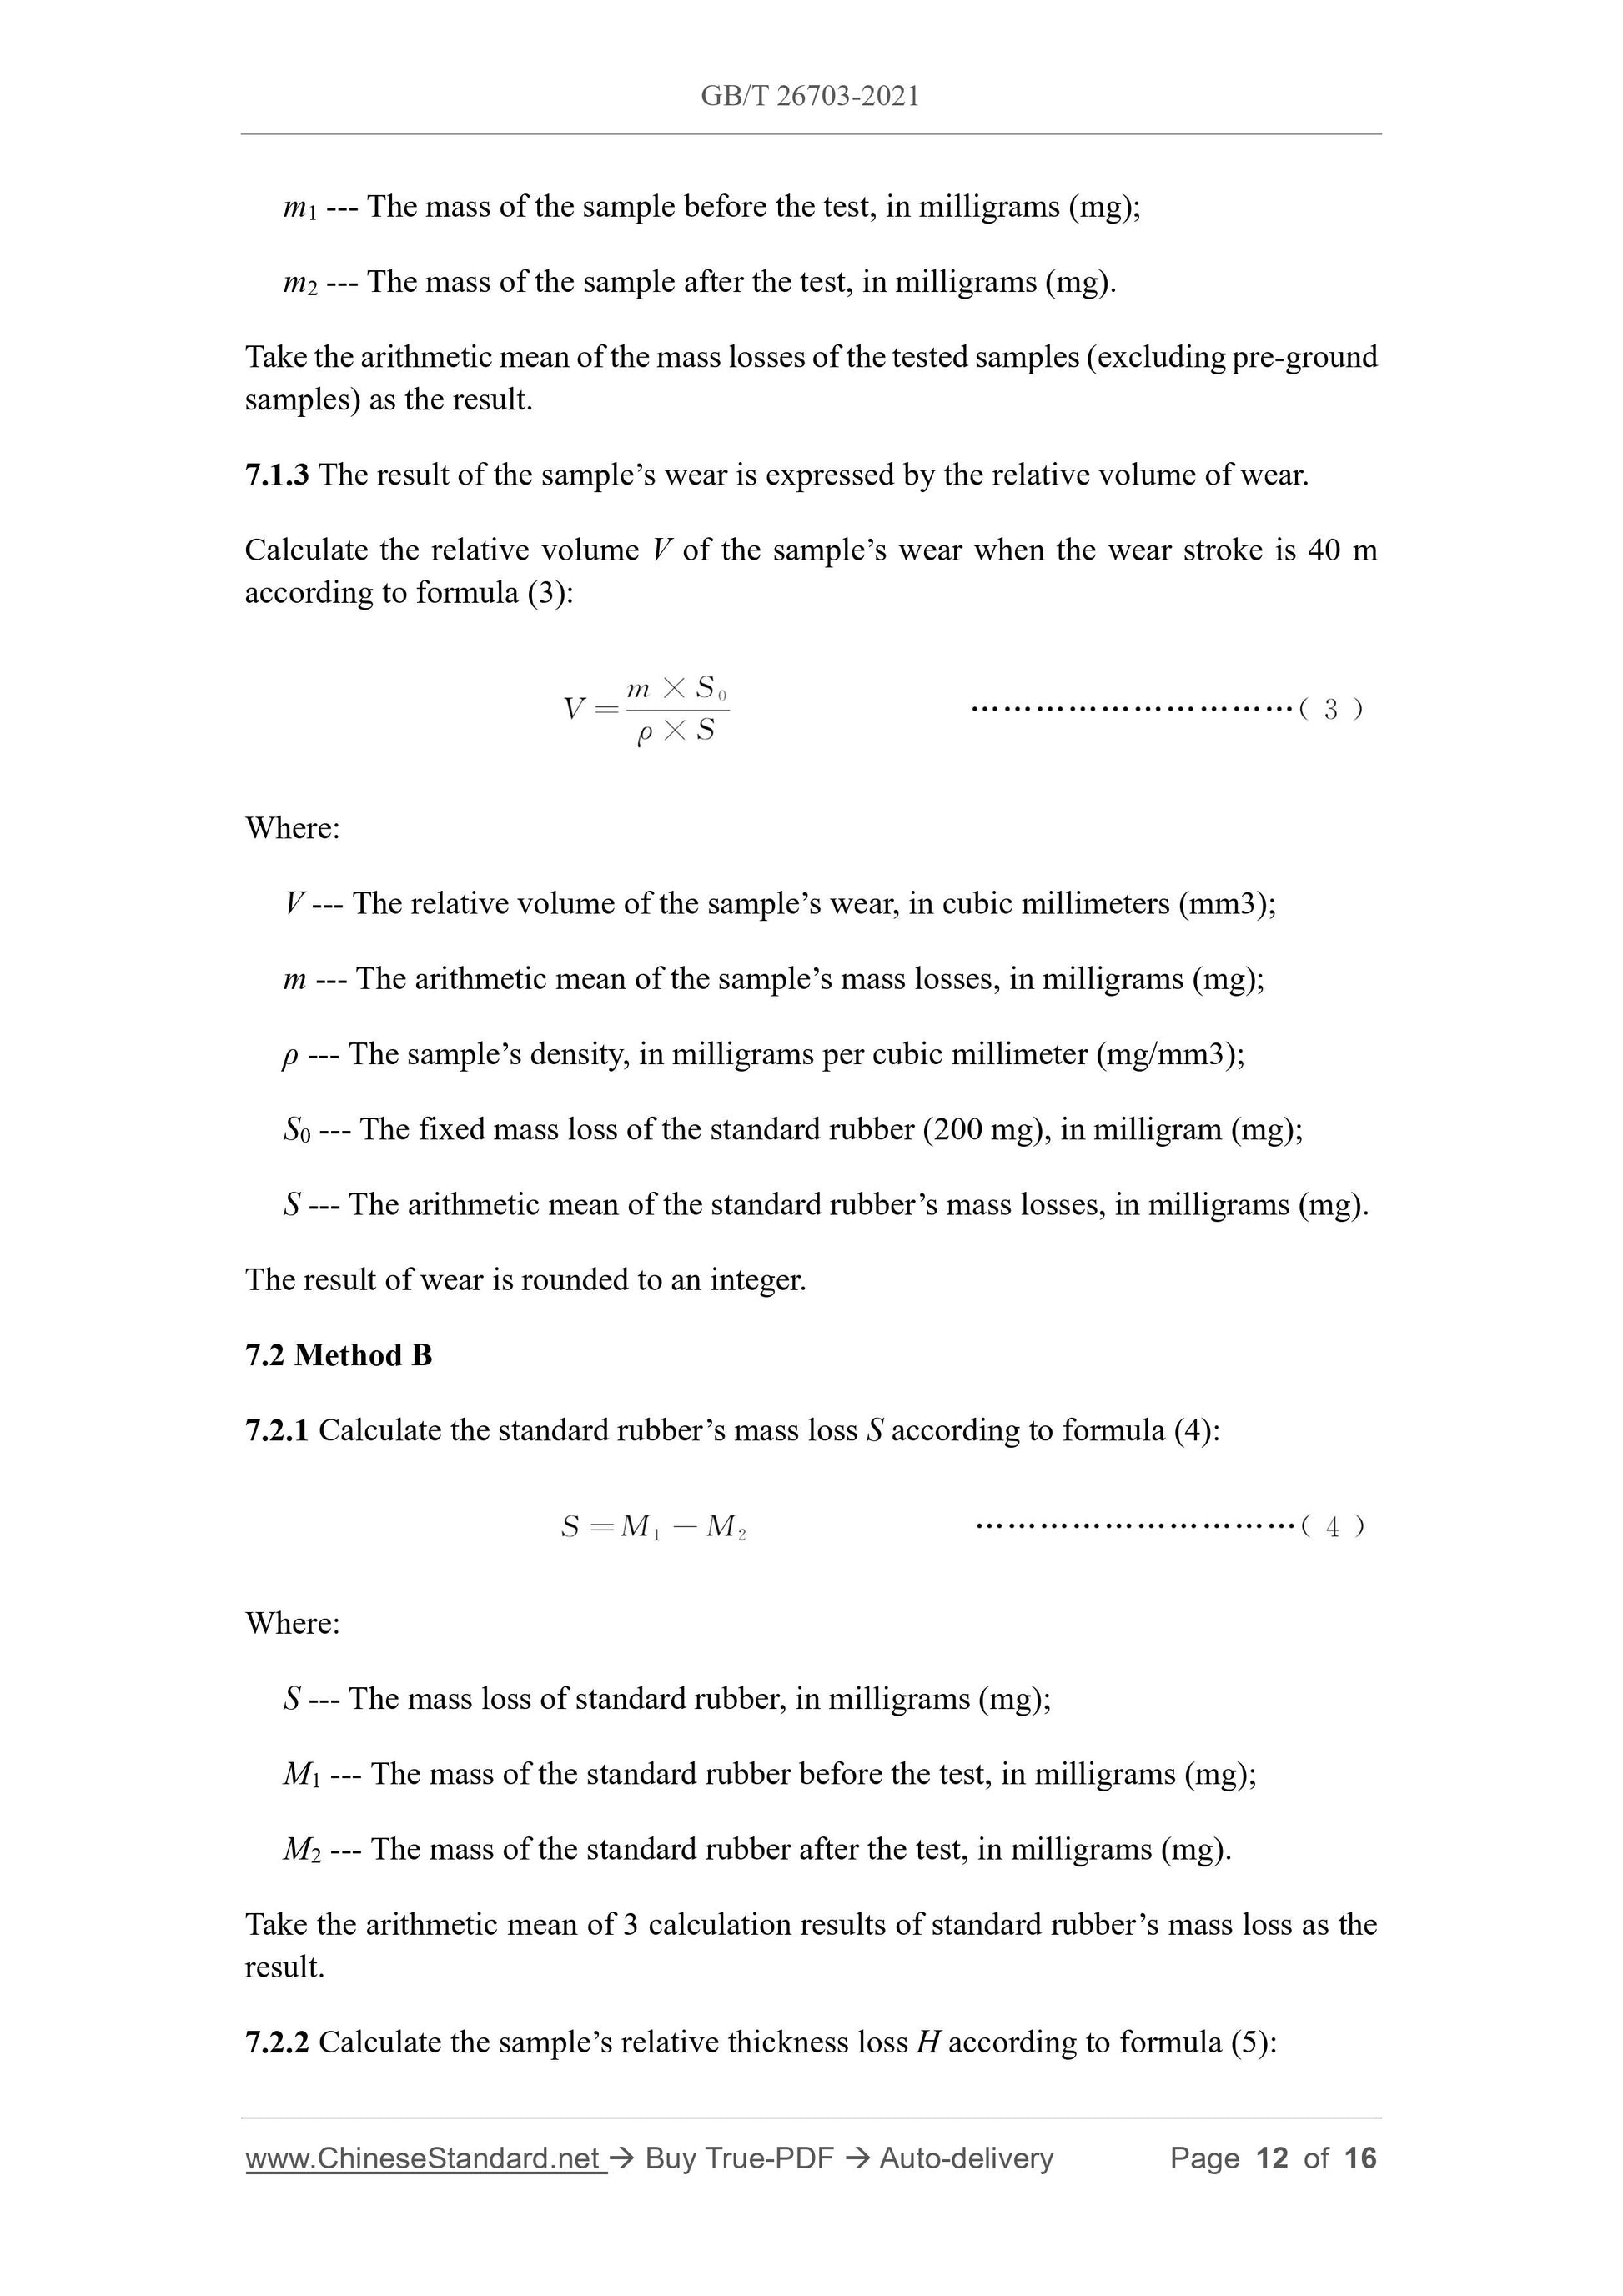 GB/T 26703-2021 Page 7